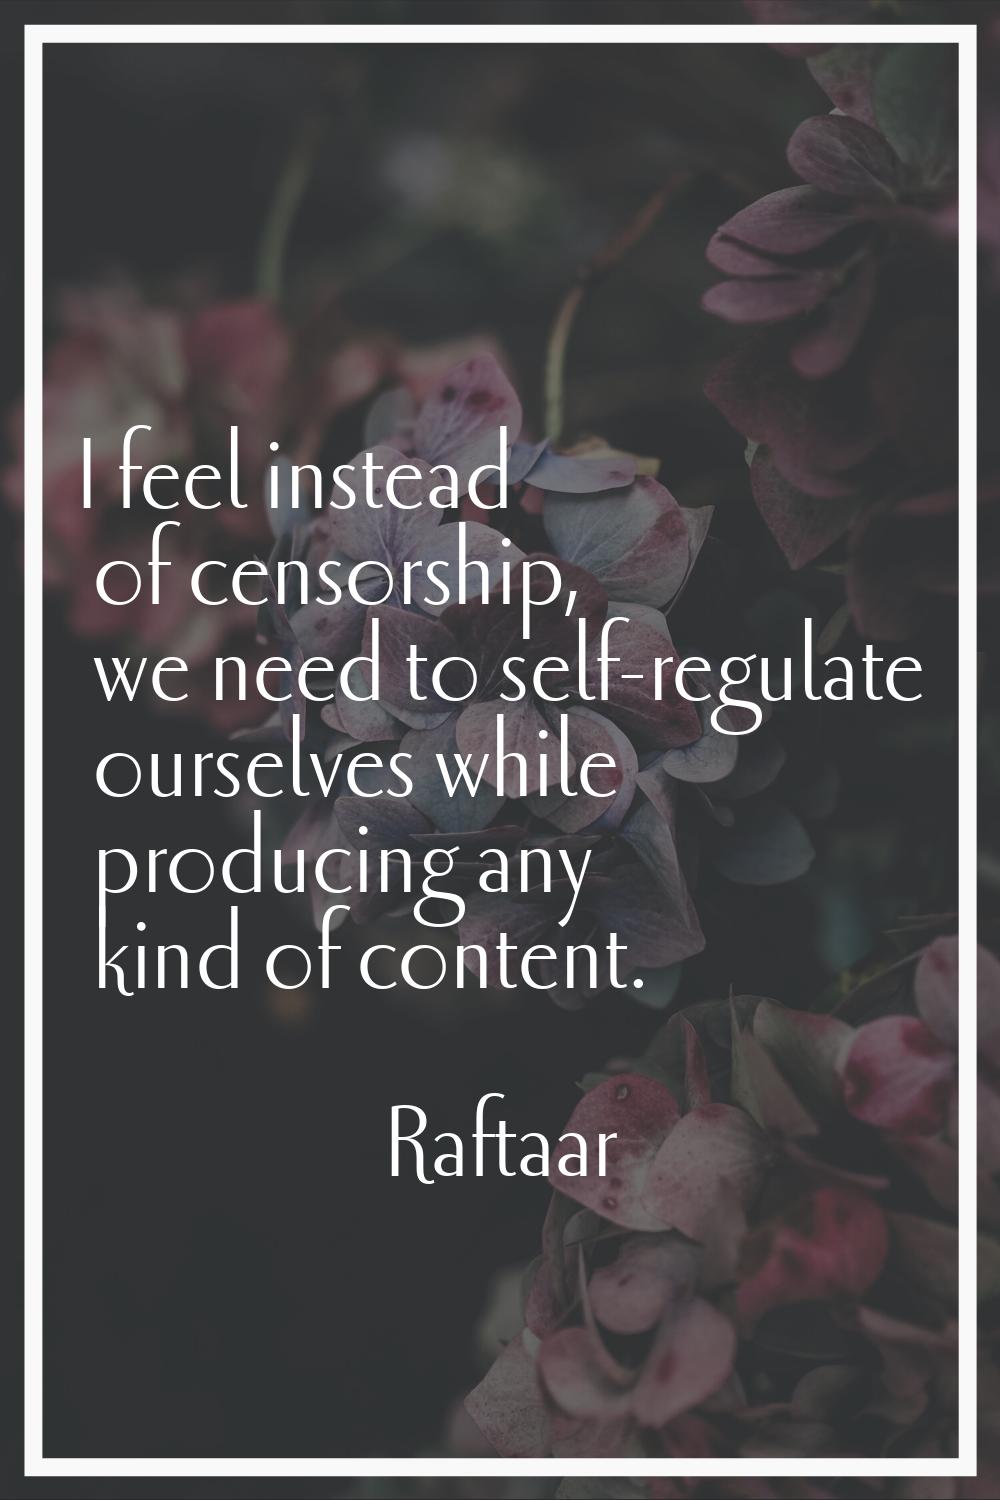 I feel instead of censorship, we need to self-regulate ourselves while producing any kind of conten